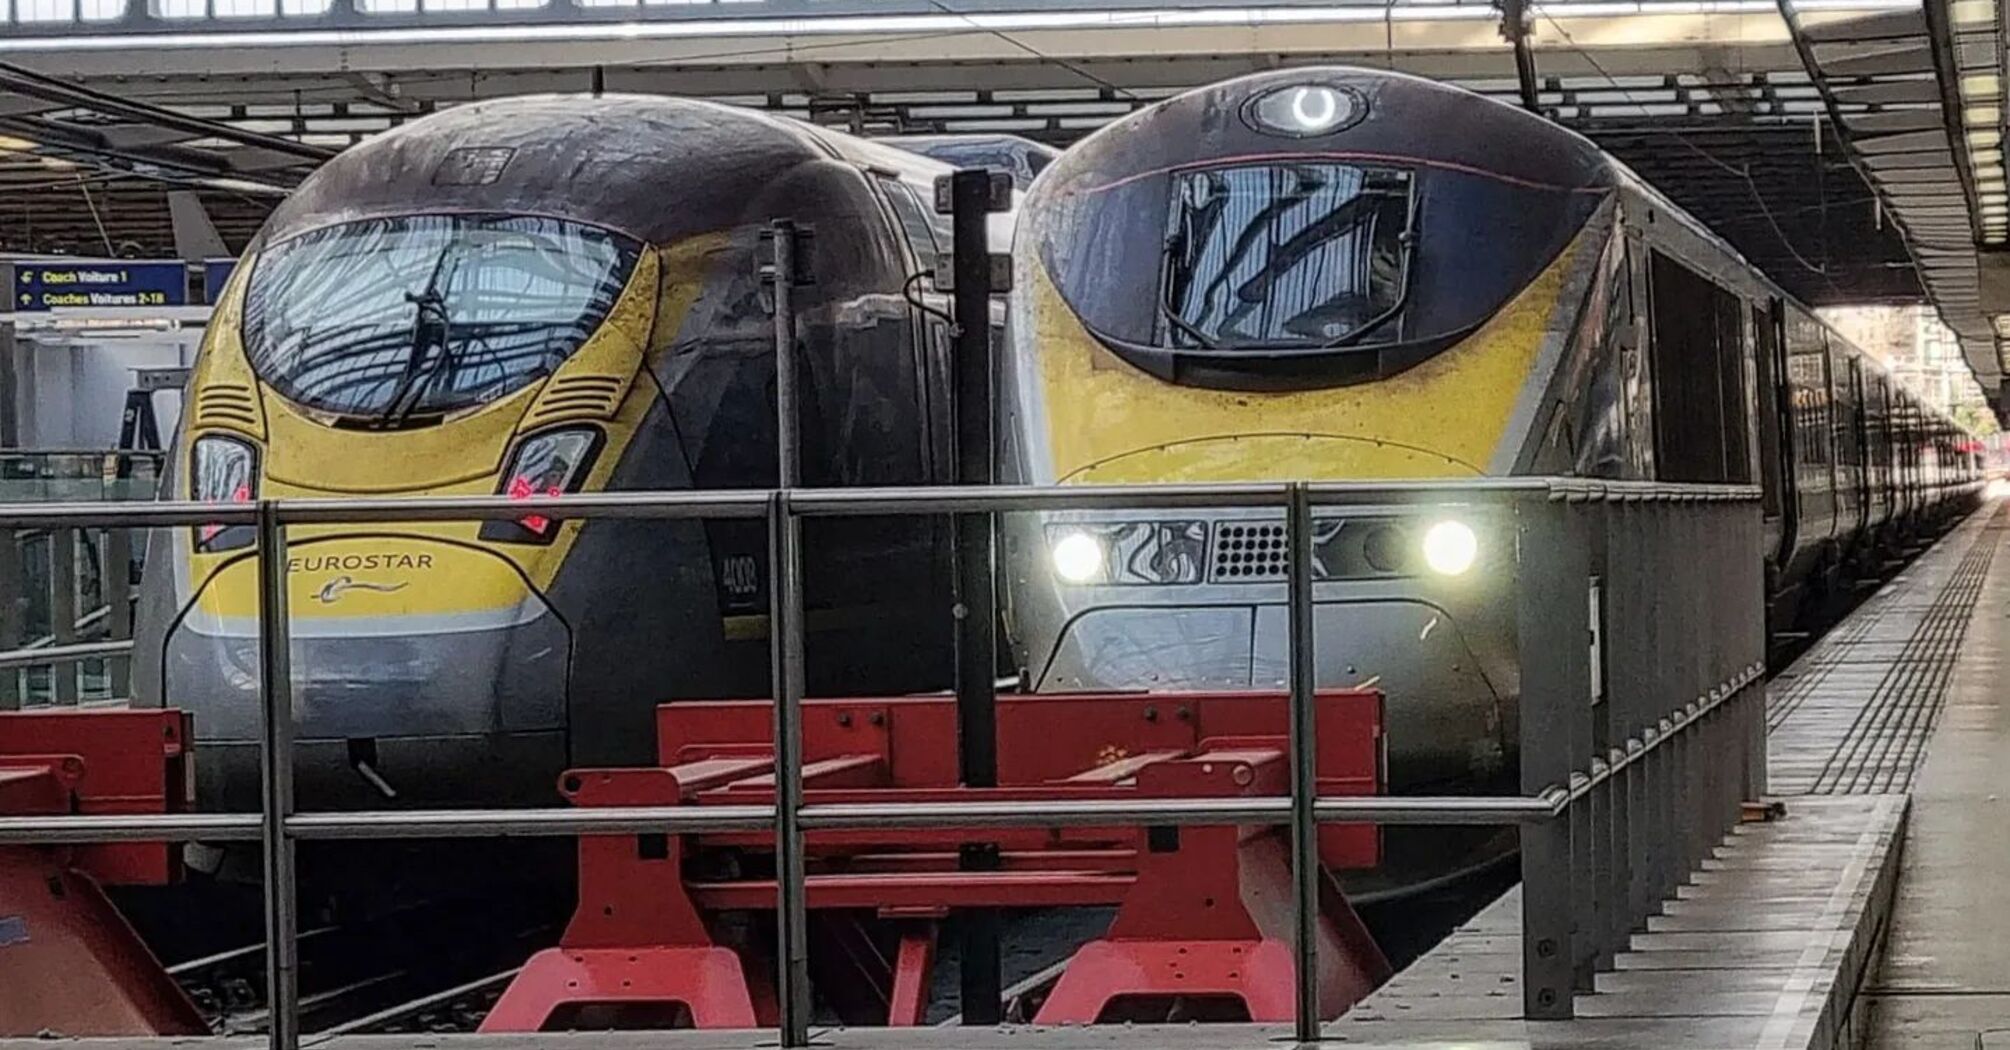 Eurostar trains resume operation after flooding in tunnels was cleaned